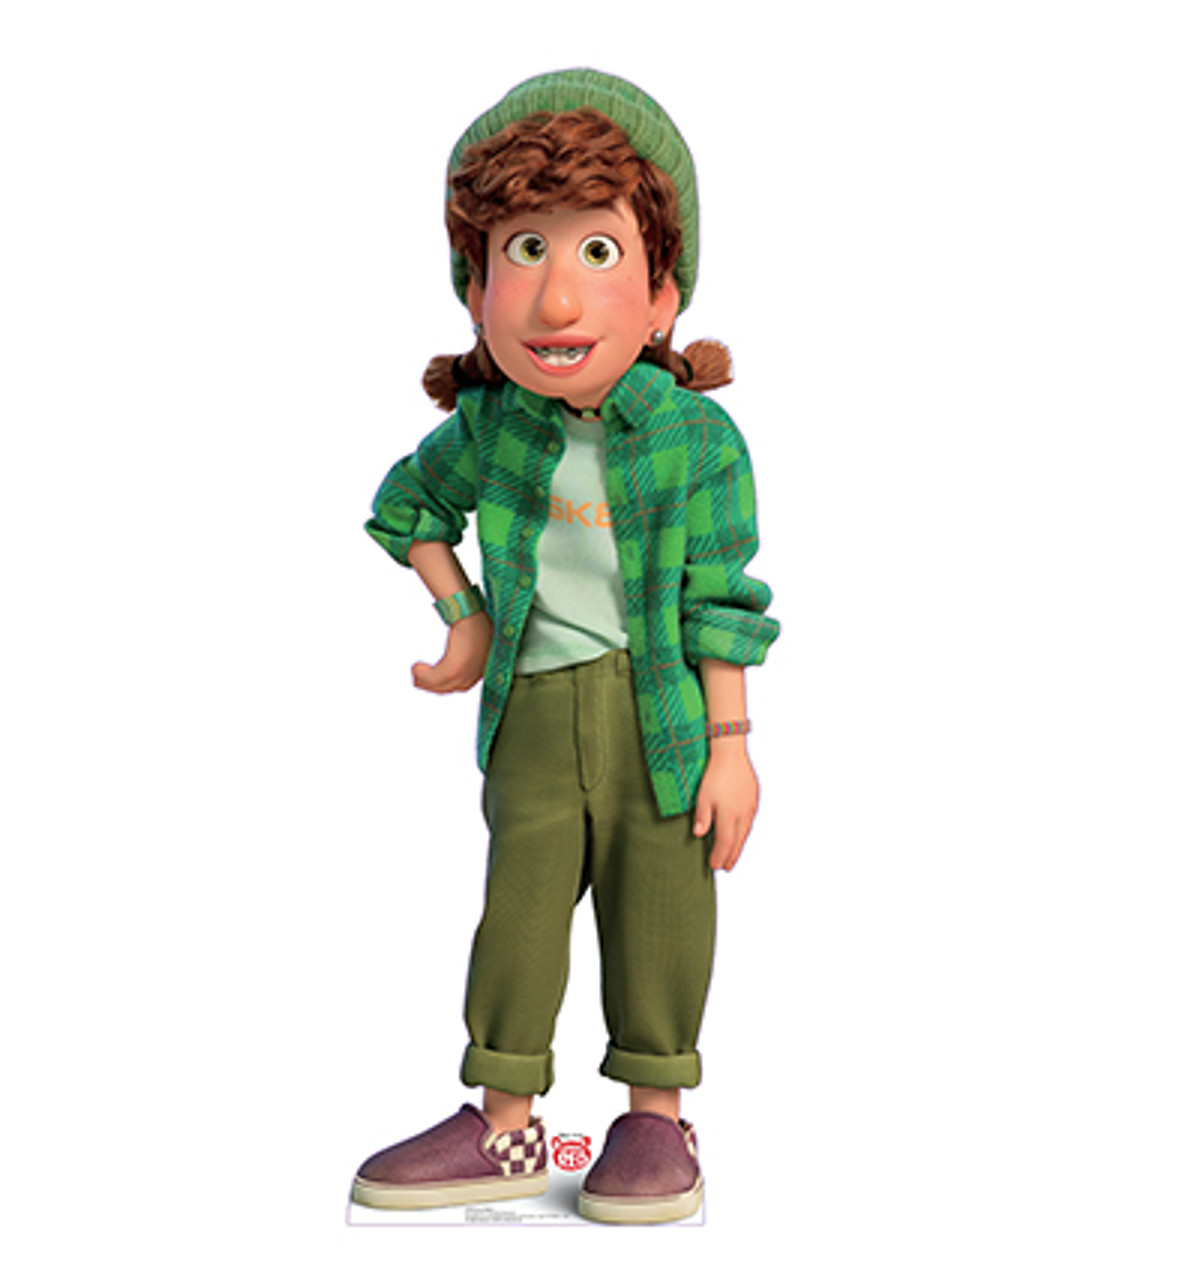 Life-size cardboard standee of Miriam Wexler from Disney/Pixar's Turning Red.